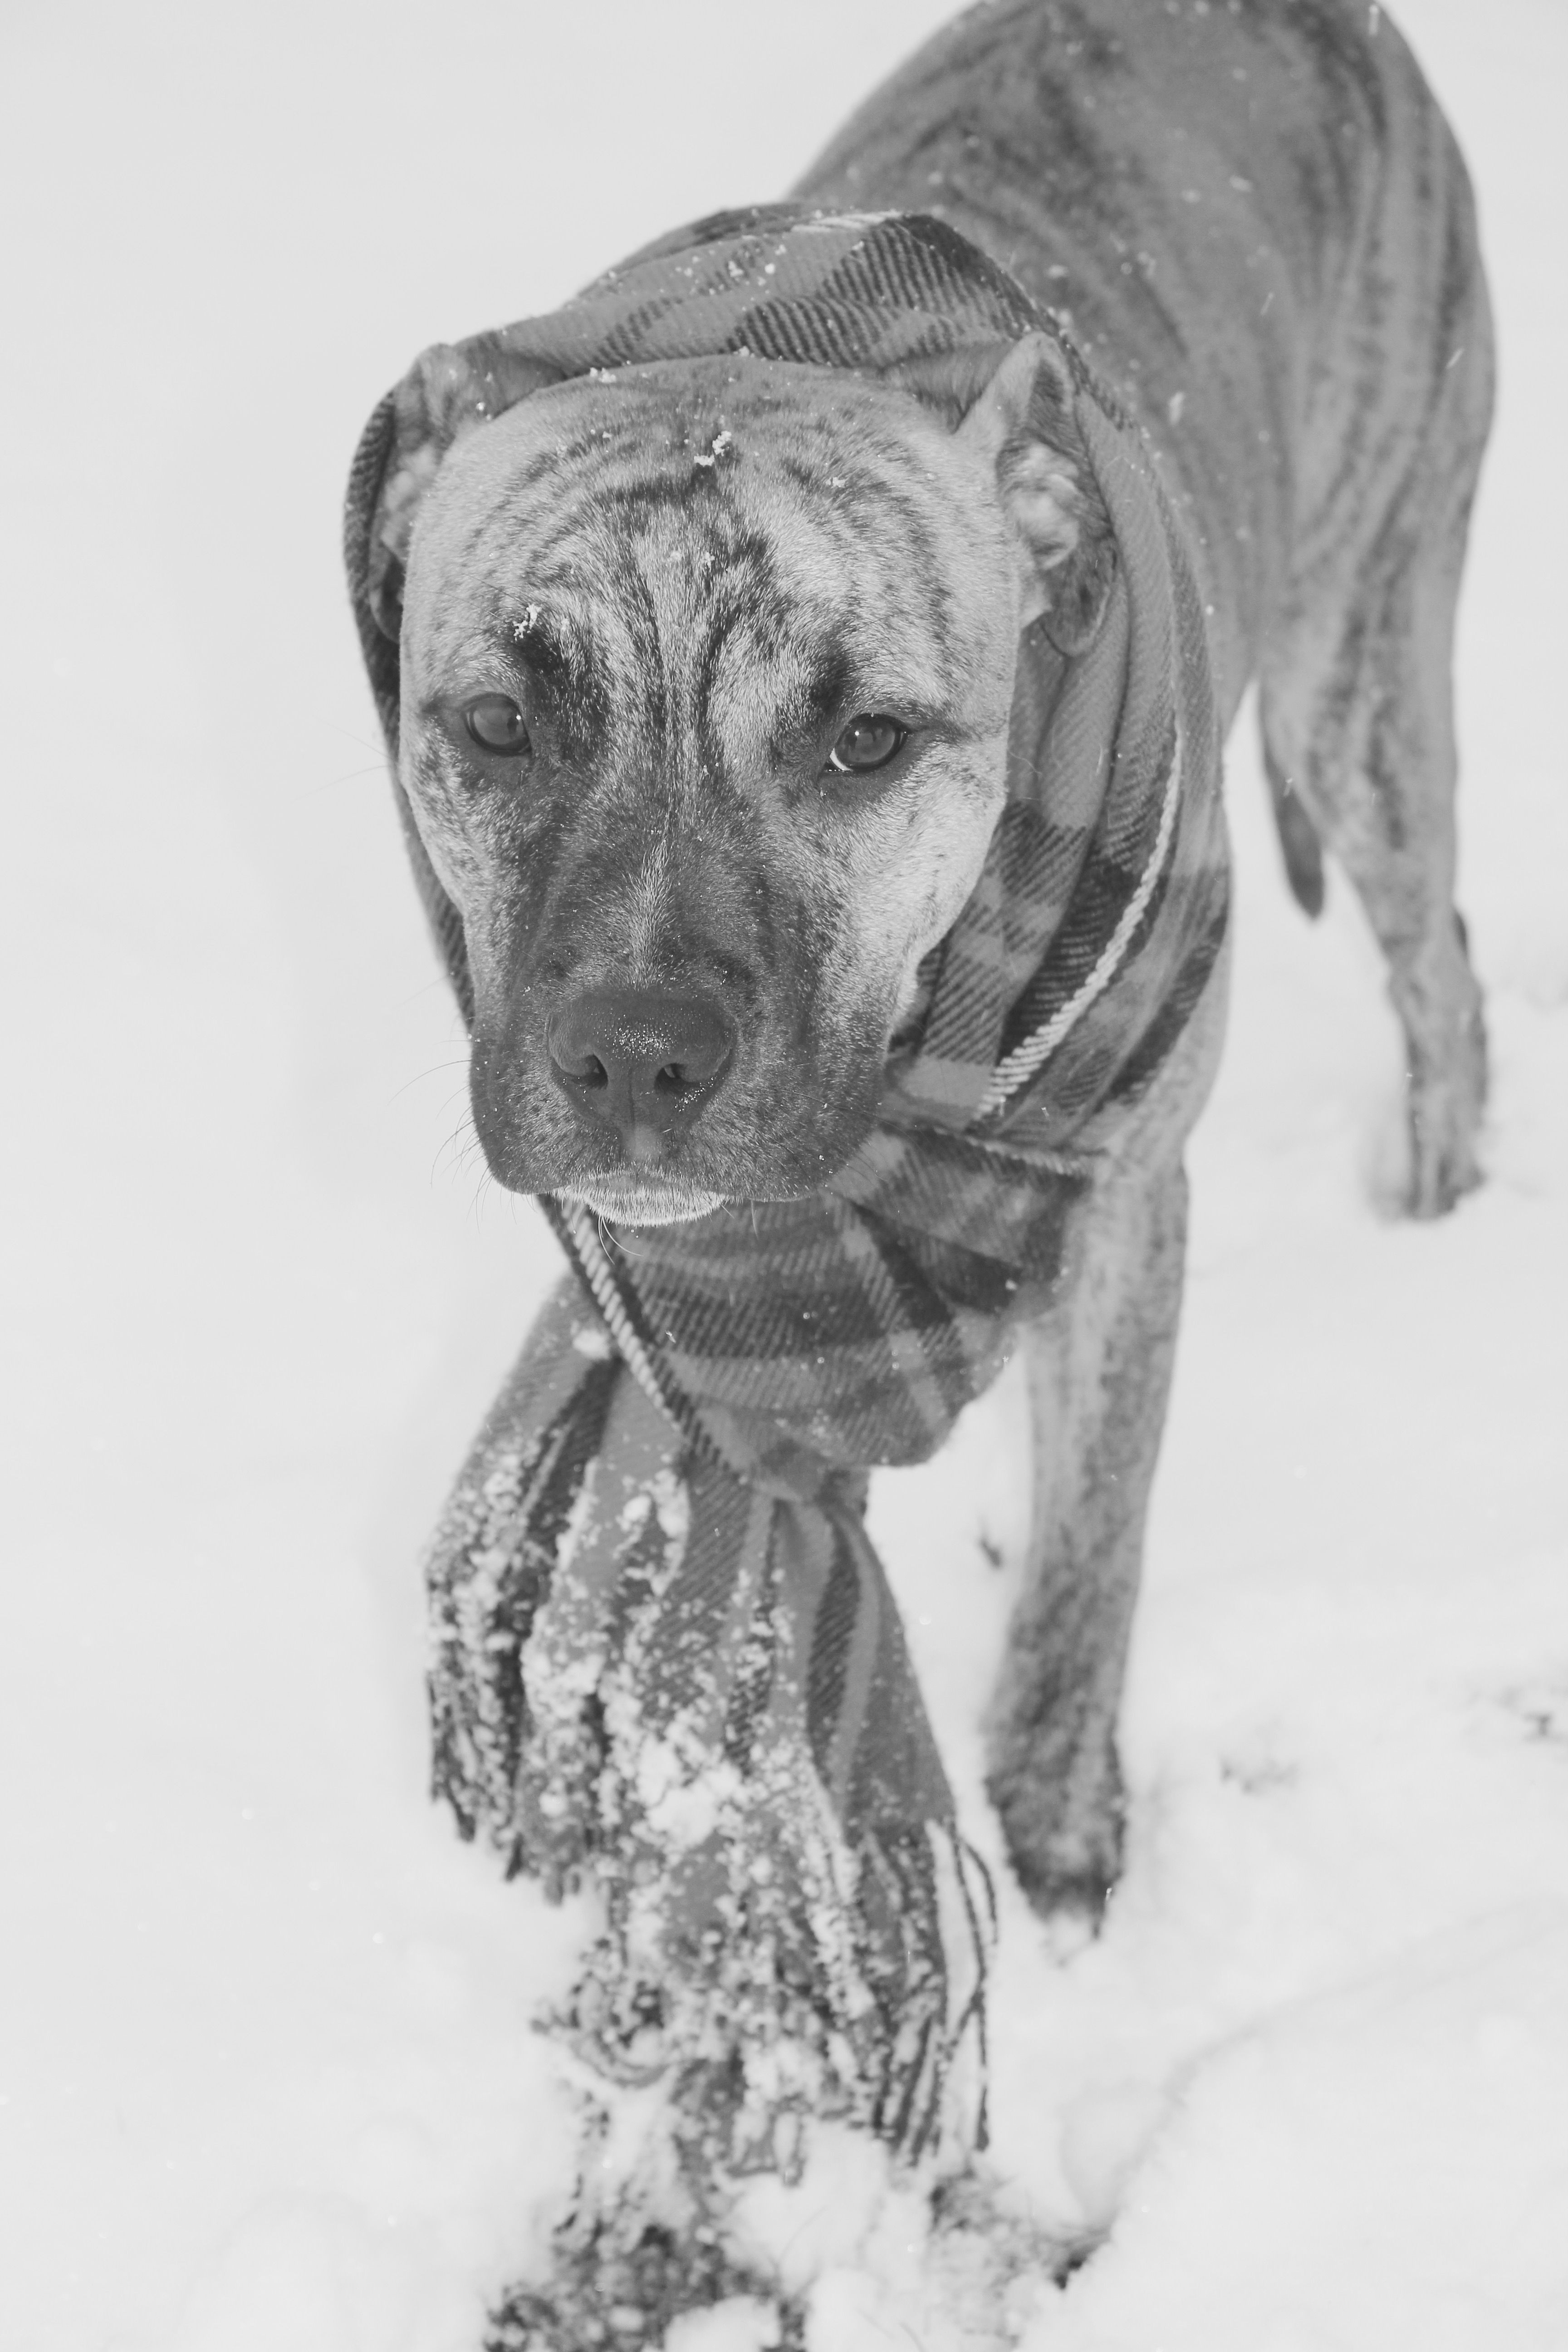 Staffy Dog Drawing Brindle Pitbull Staffy Stafforshire Terrier In the Snow Puppy